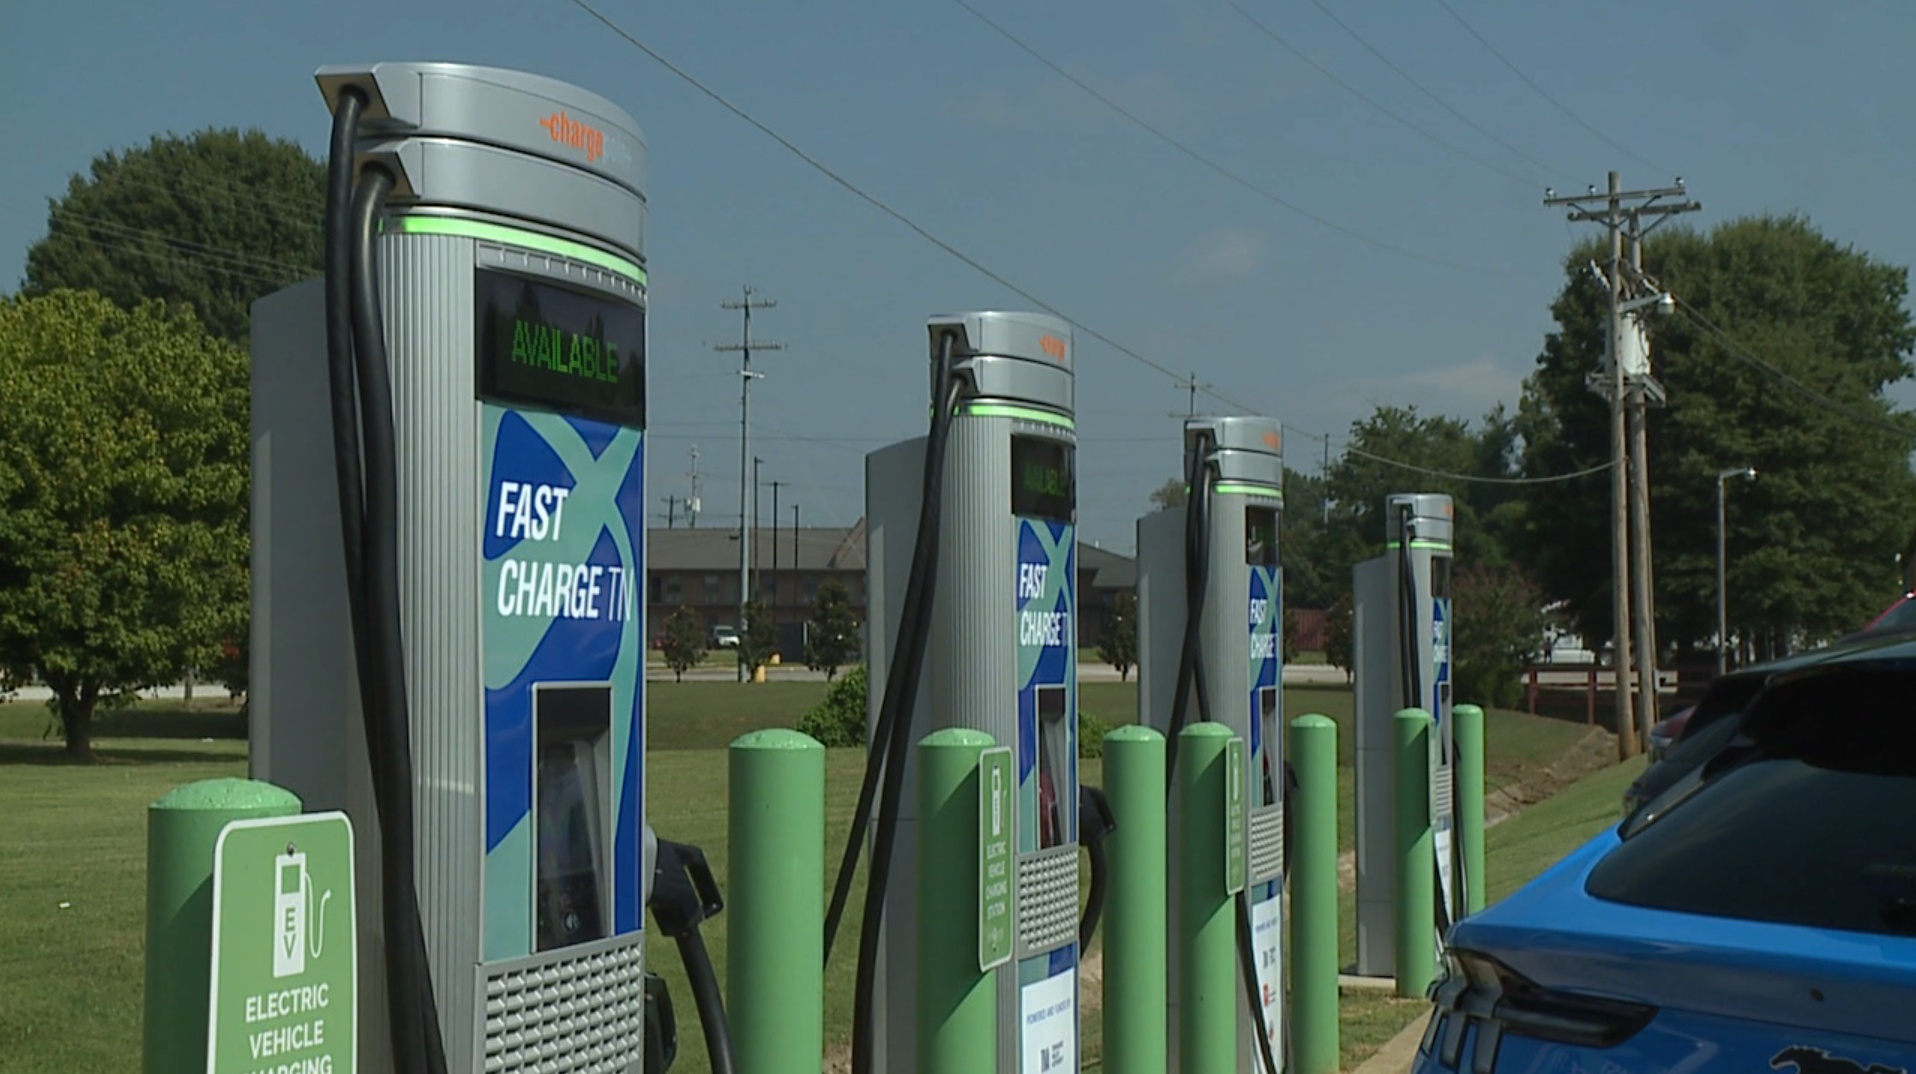 State funds 4 new electric vehicle charging stations in Yampa Valley